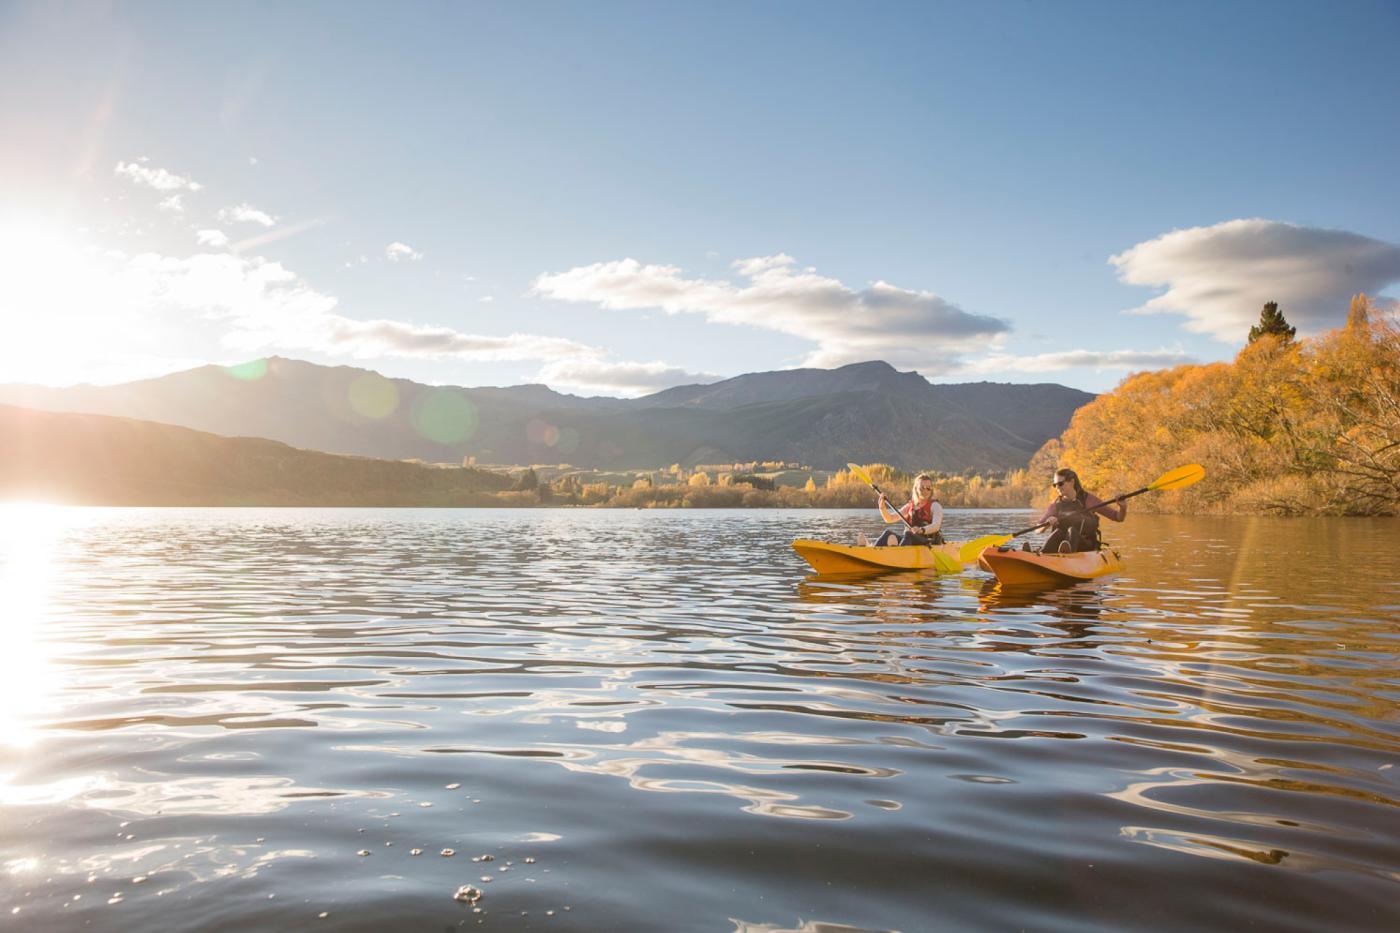 Two frineds kayaking on a lake with yellow autumn trees in the background